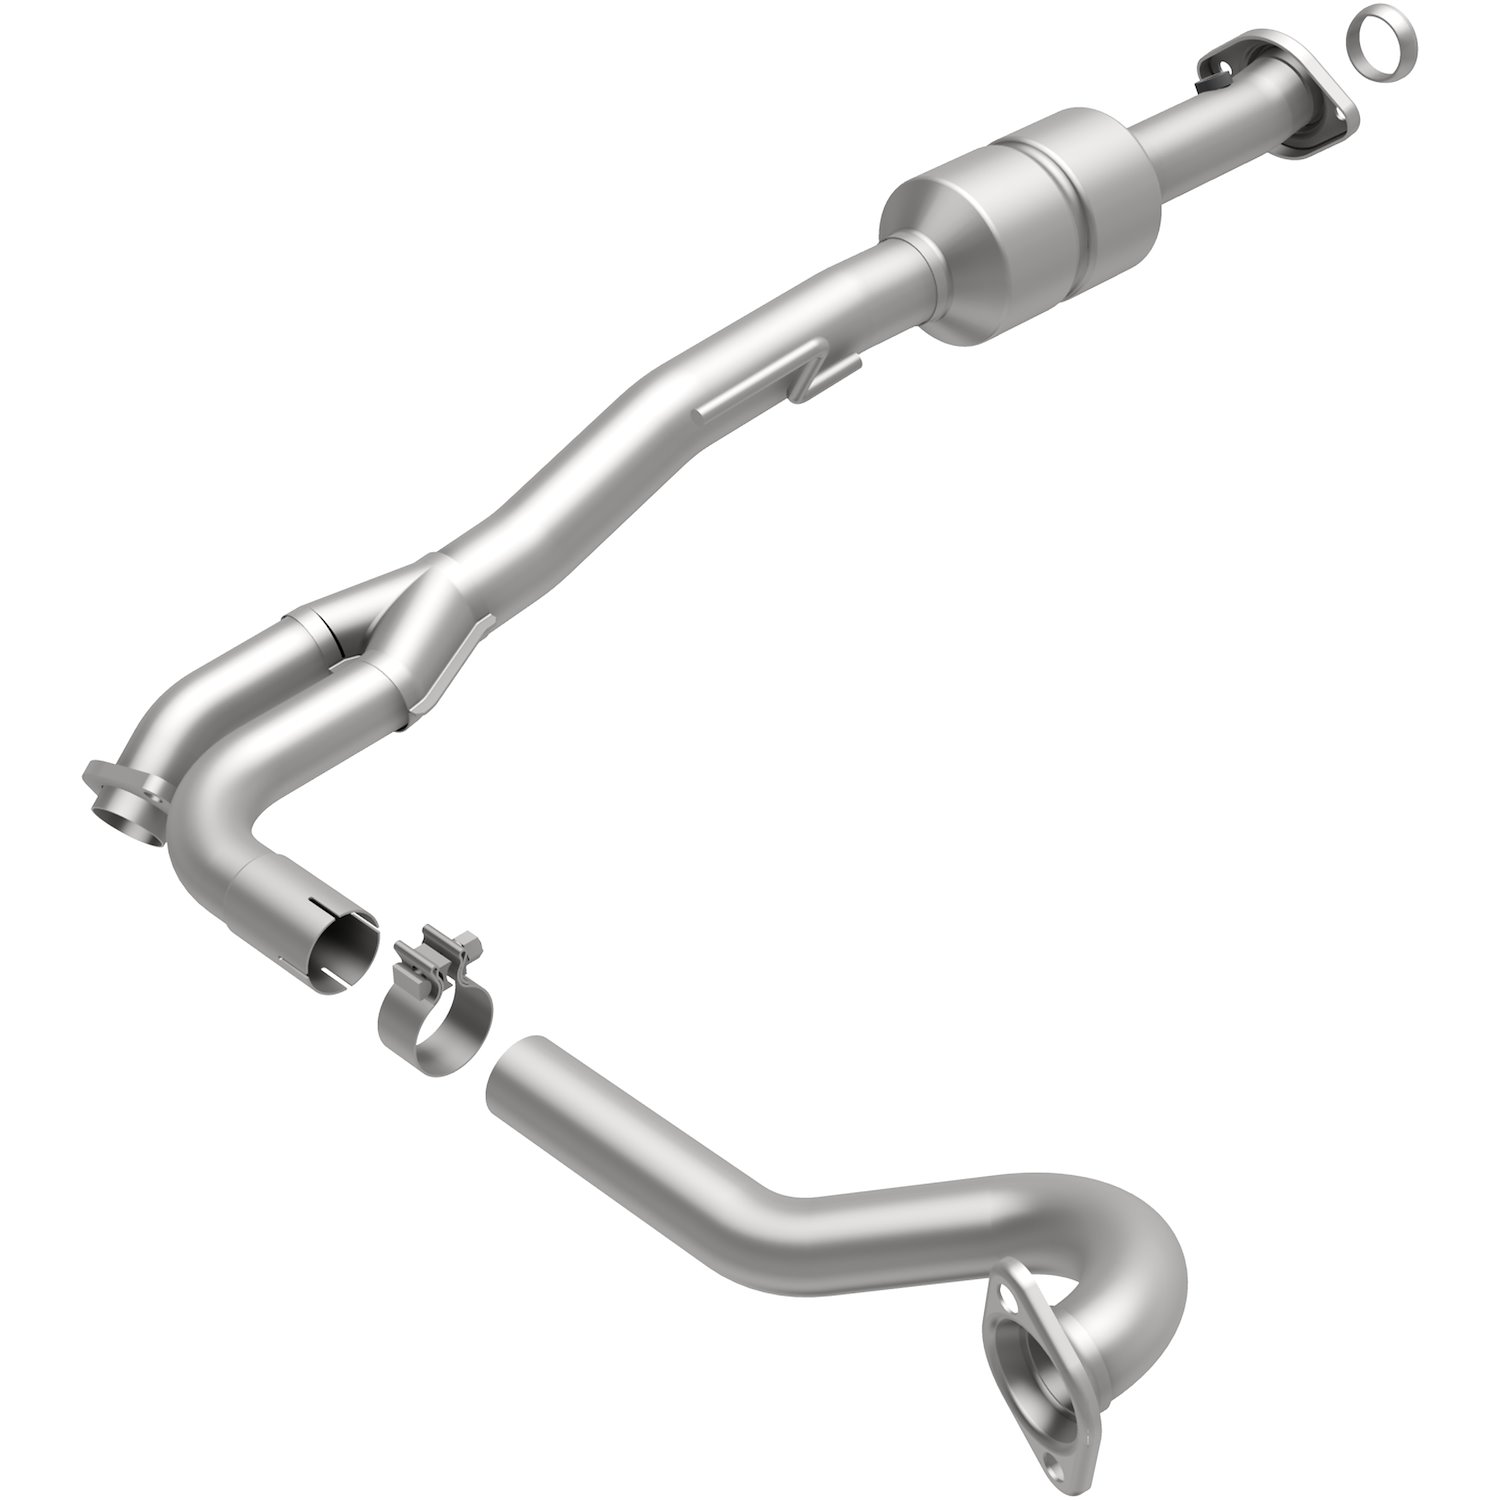 2002-2003 Jeep Liberty HM Grade Federal / EPA Compliant Direct-Fit Catalytic Converter